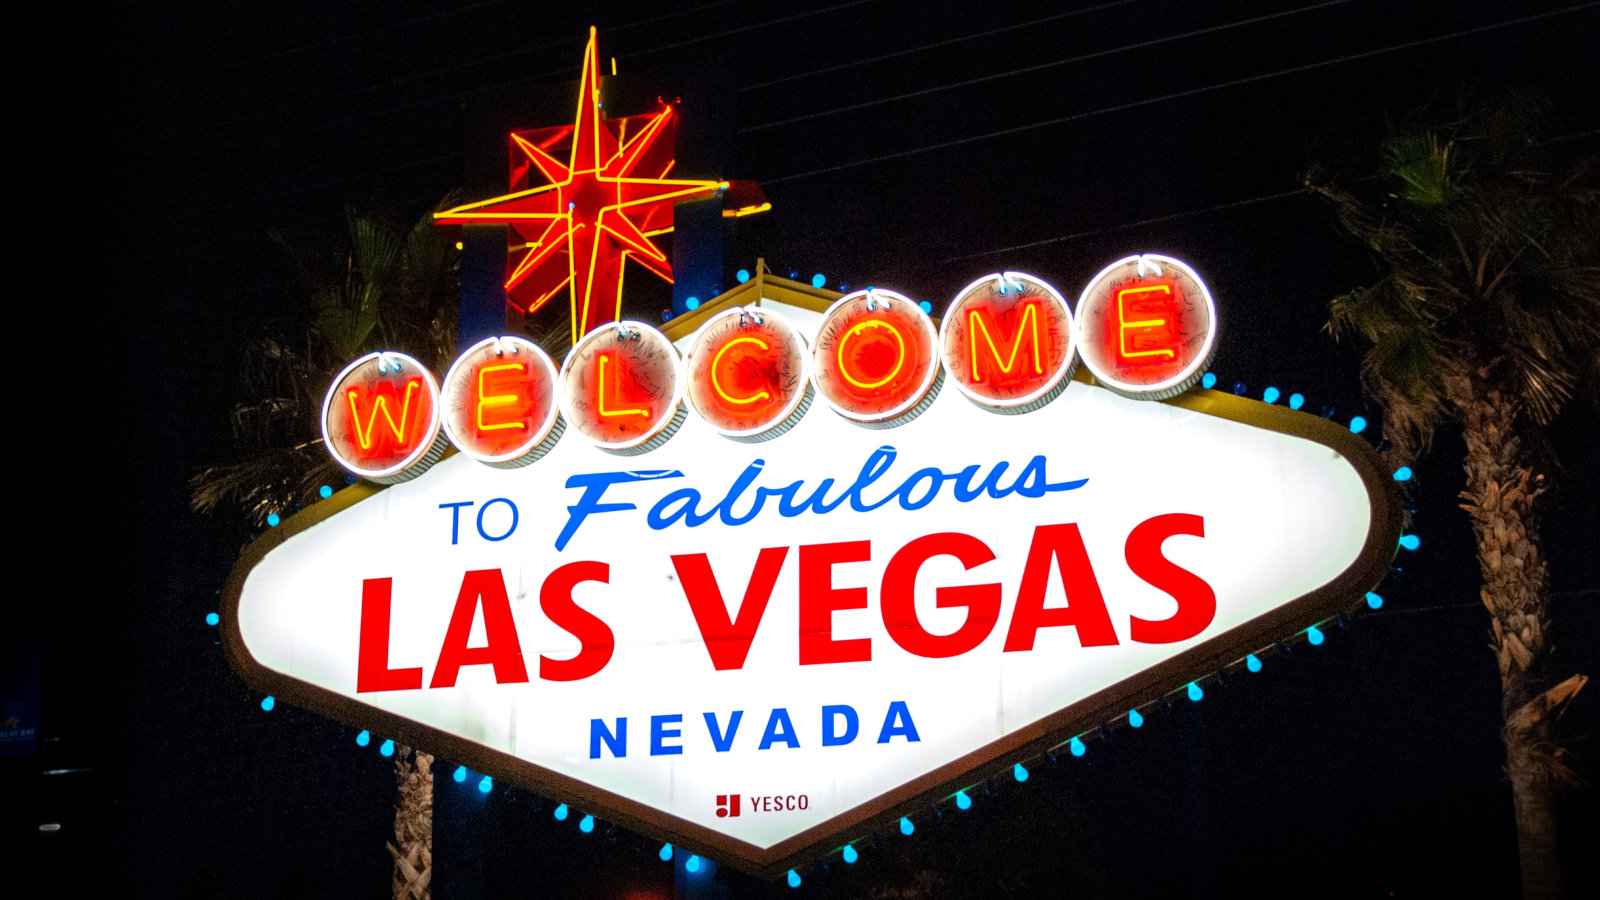 Nevada is home to Las Vegas and definitely one of the gayest states in the USA